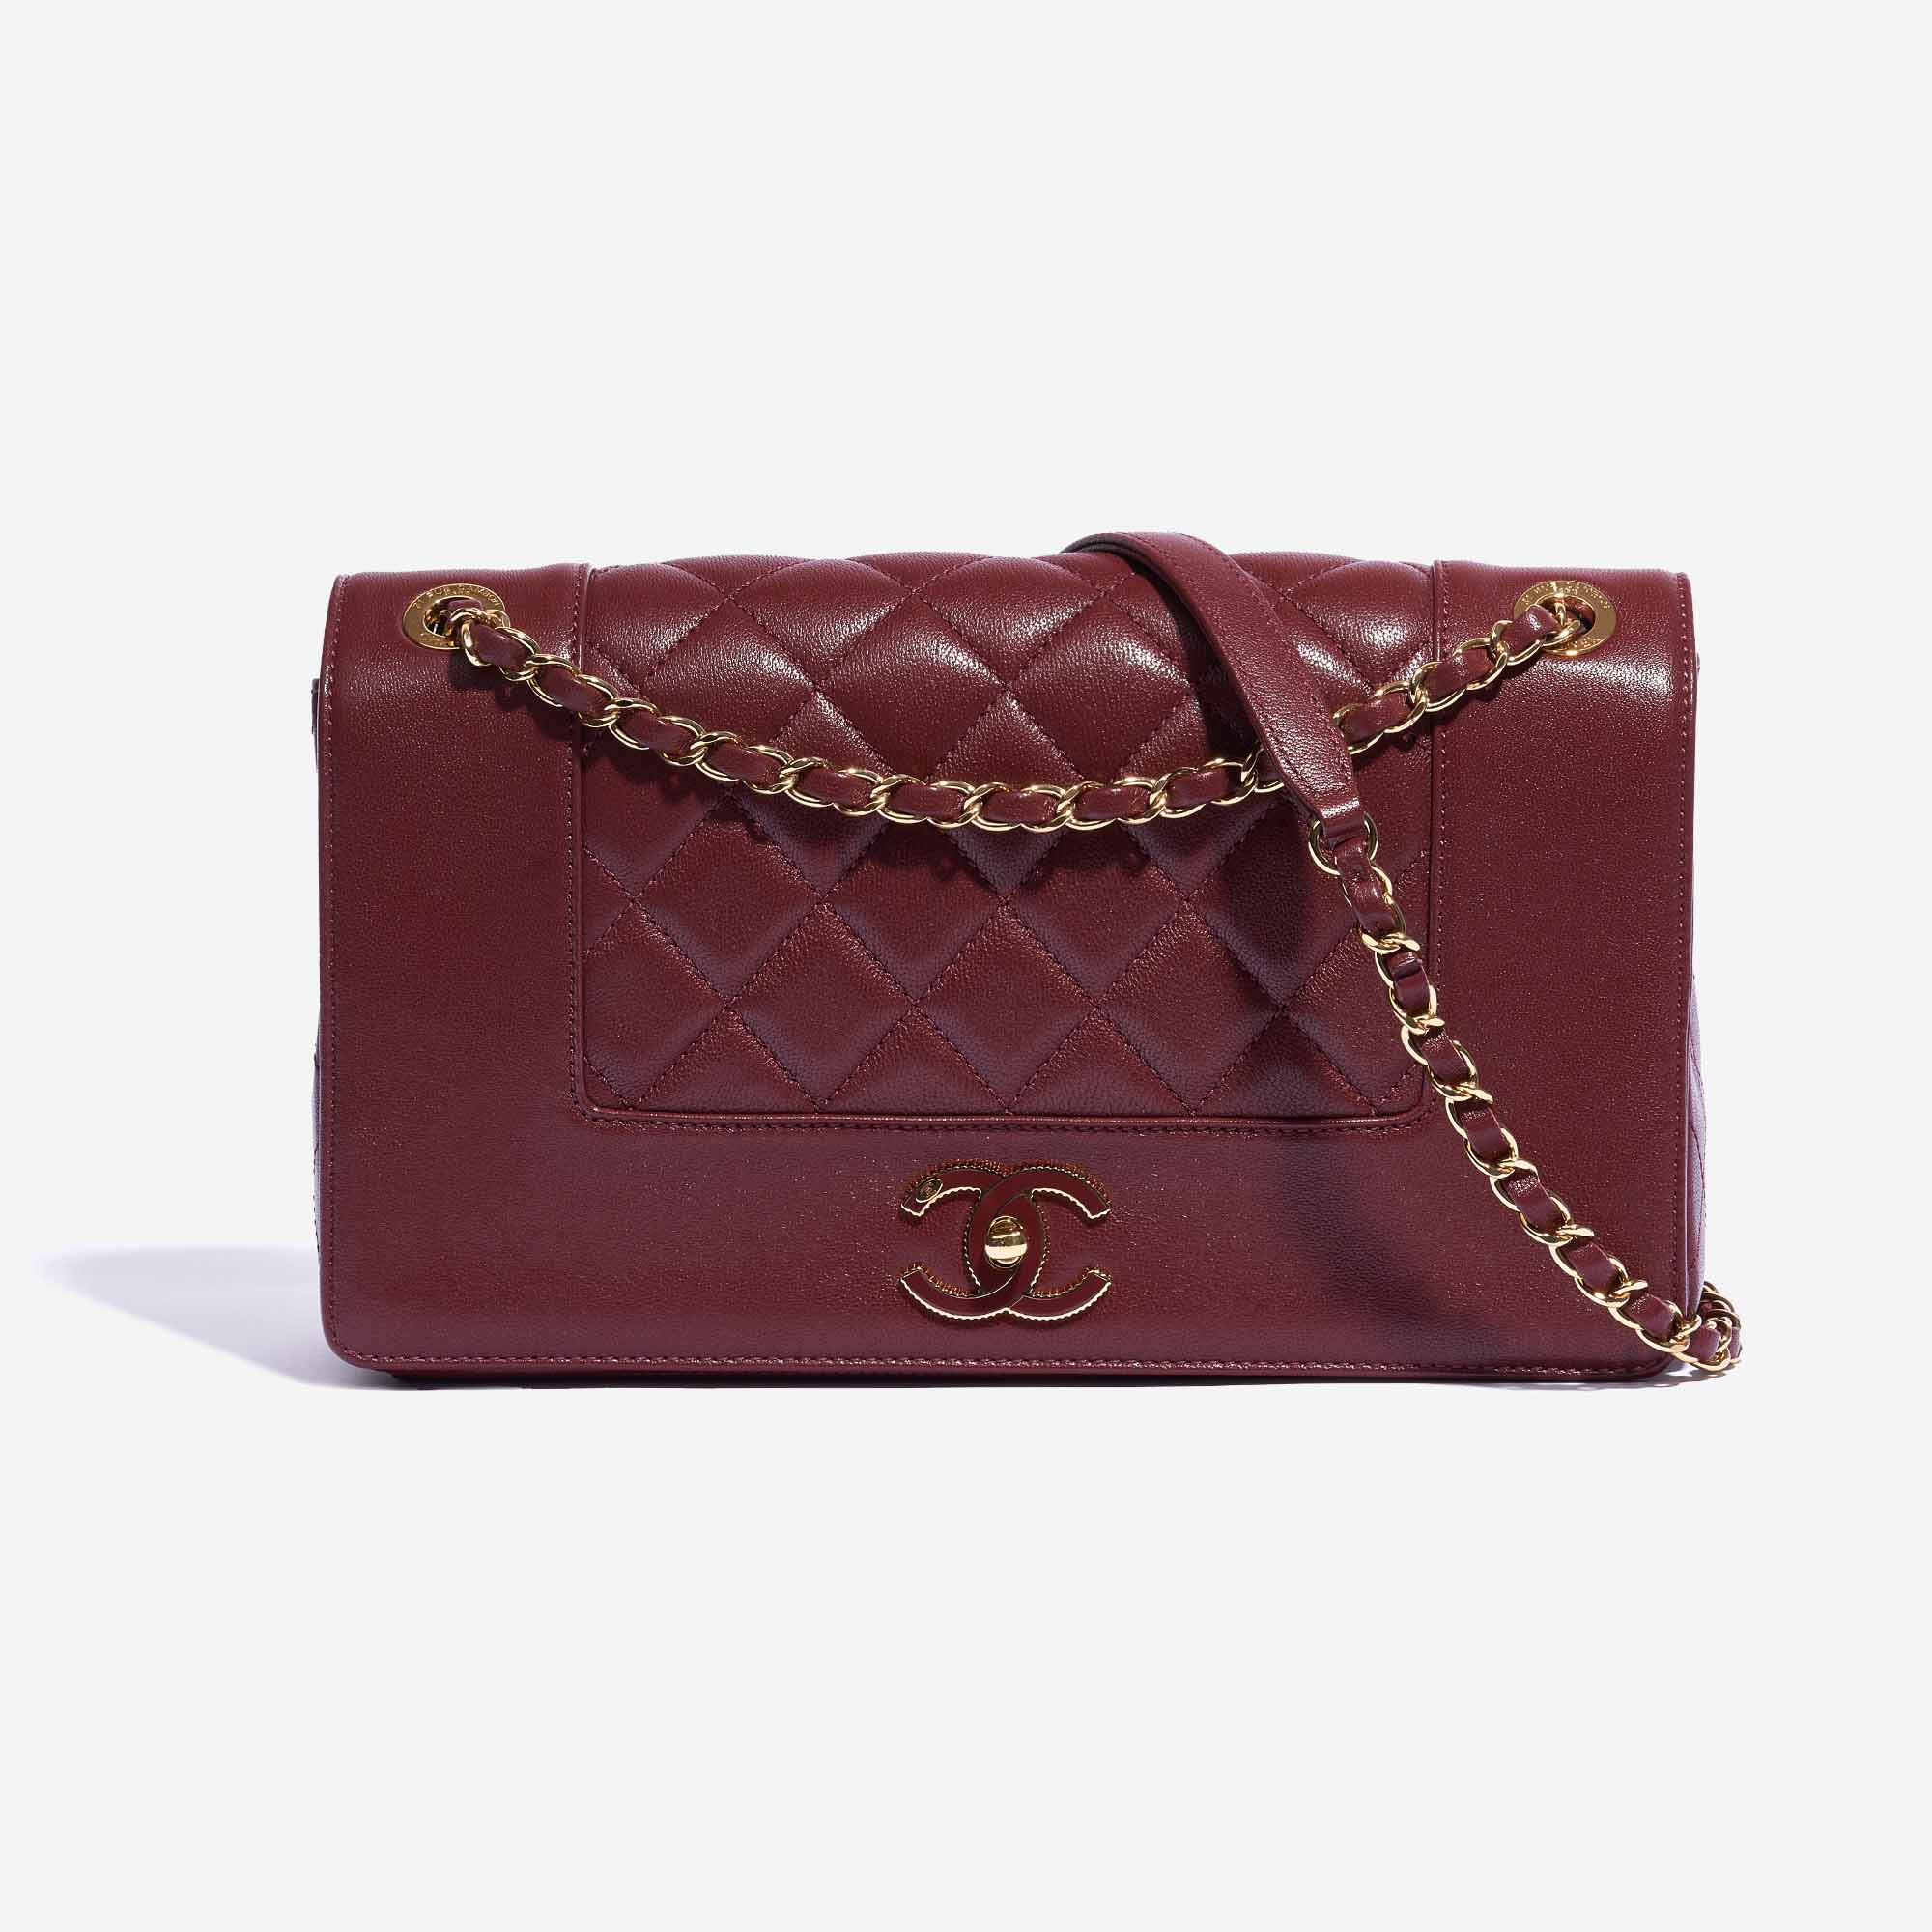 CC Quilted Mademoiselle Vintage Flap Bag  Used  Preloved Chanel Crossbody  Bag  LXR Canada  Red  Calf 2322NX78